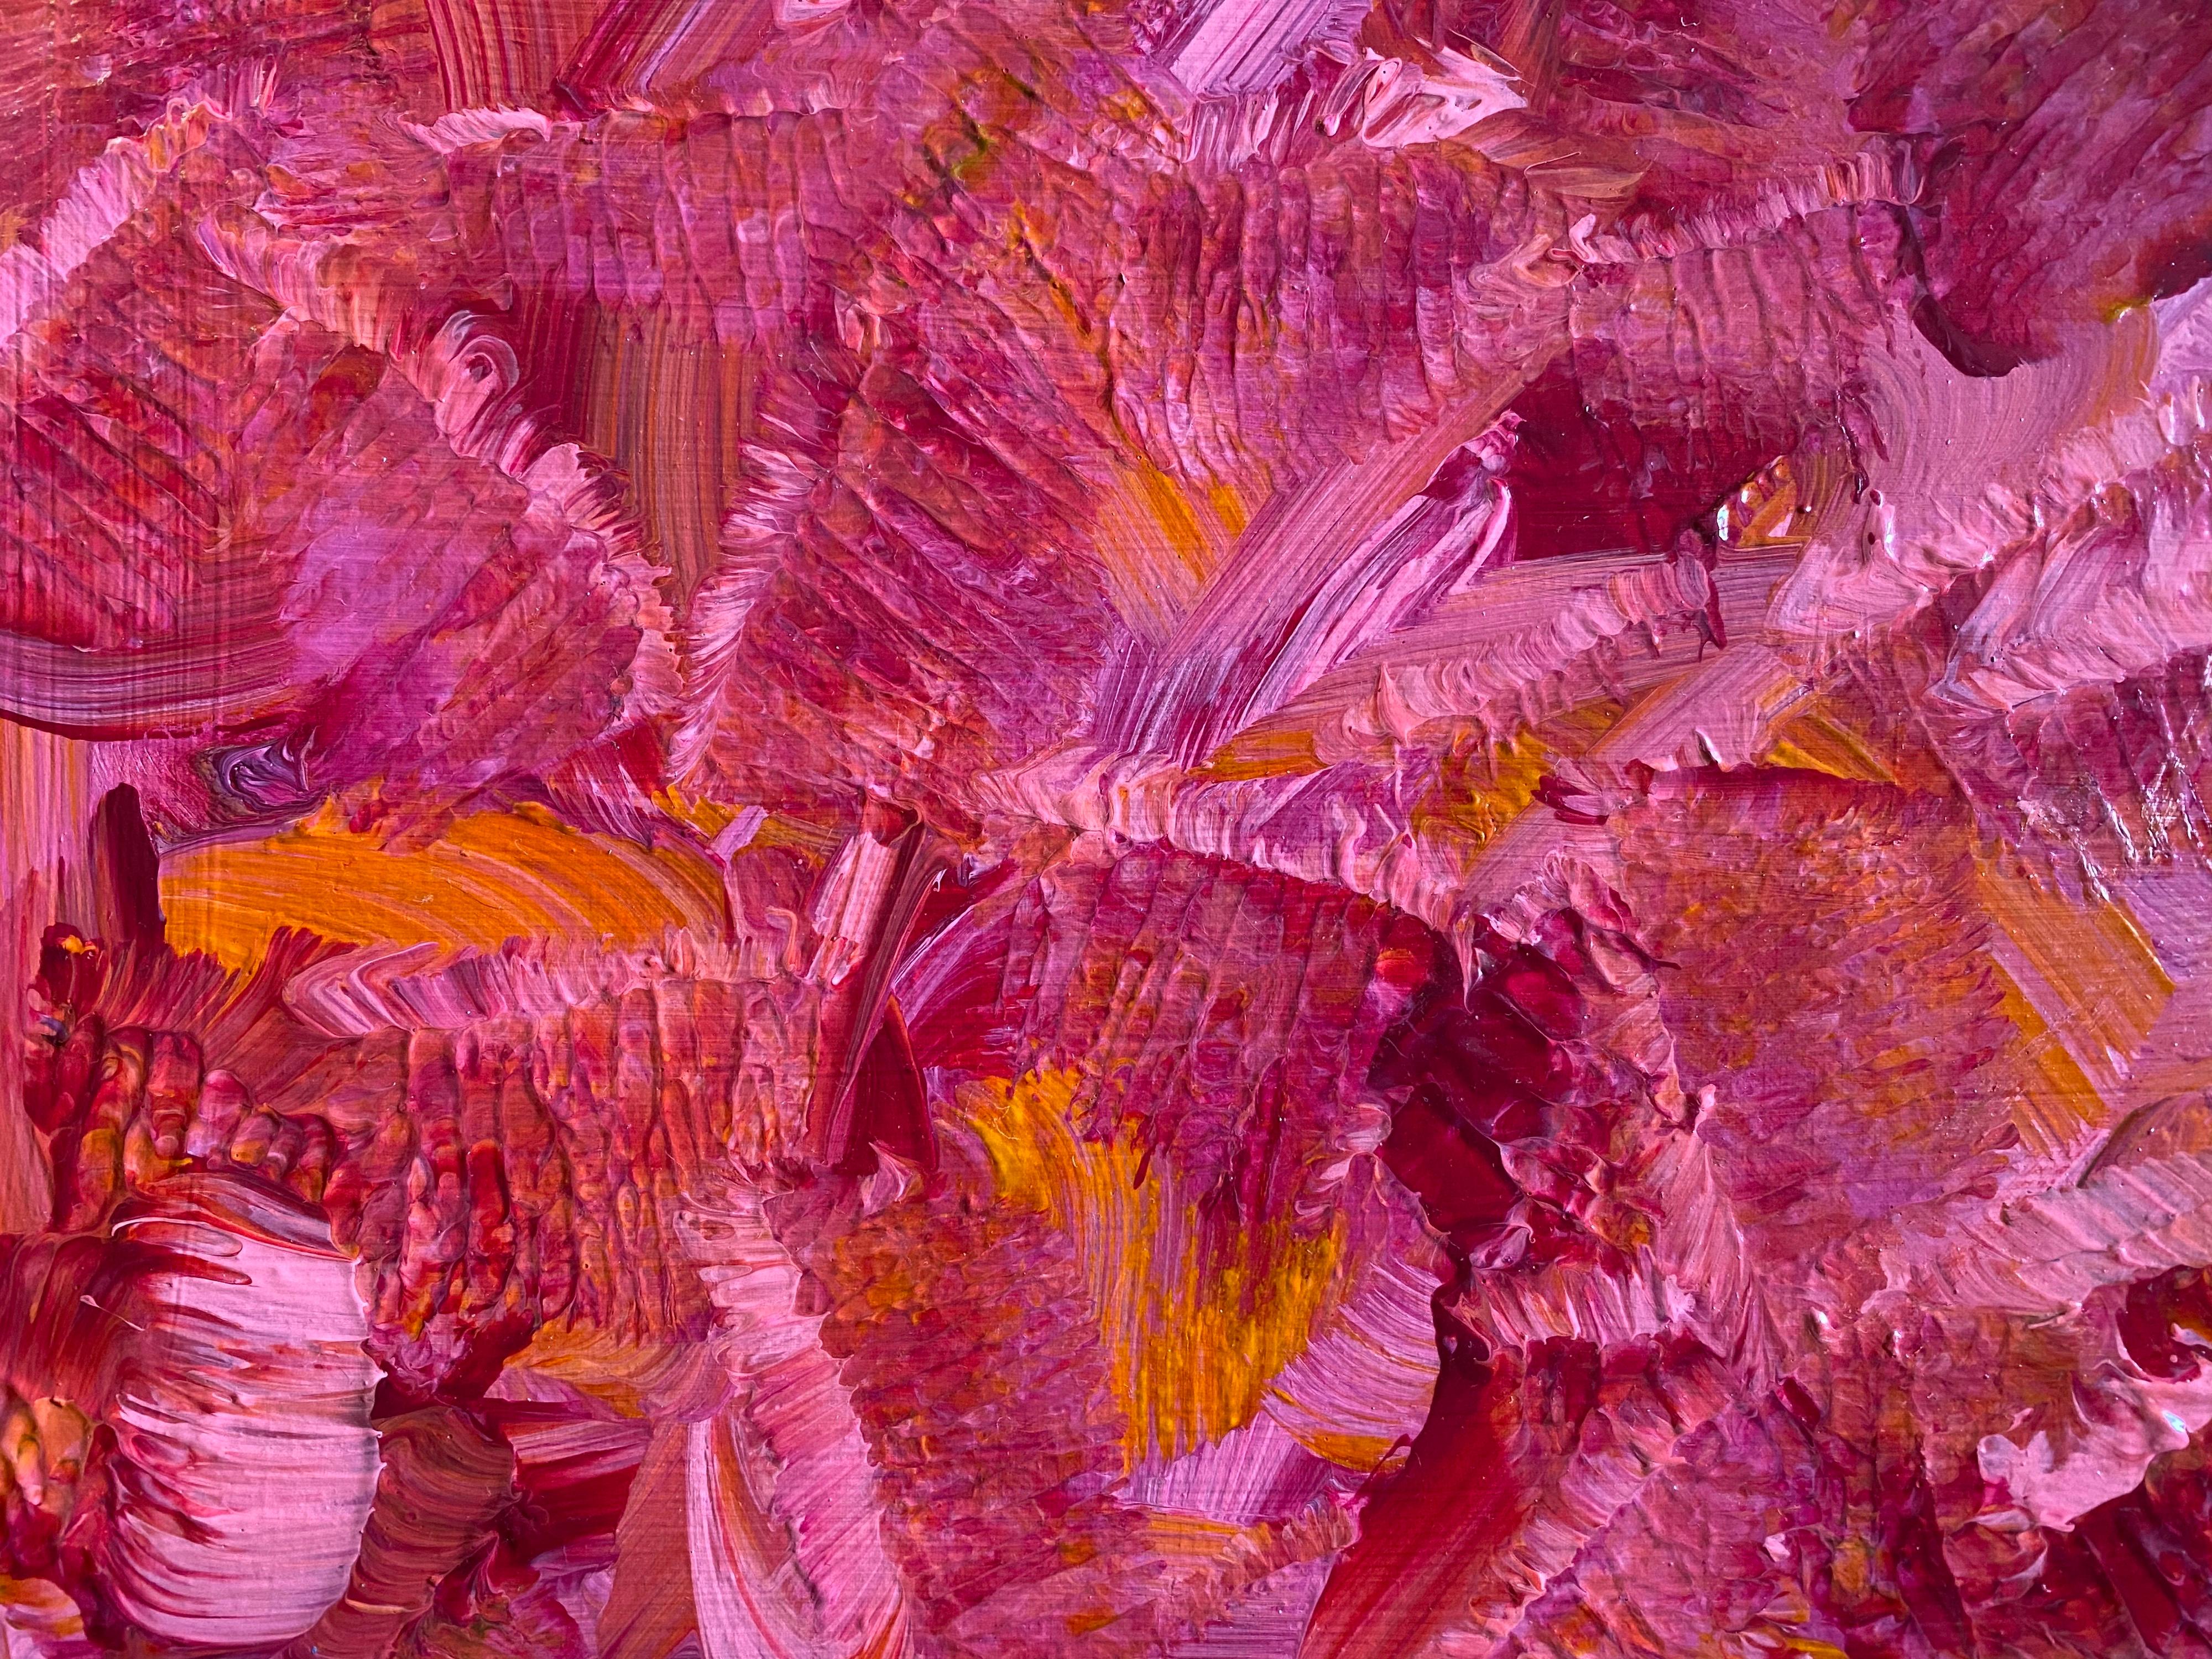 SALLY BRADSHAW (b.1962) CONTEMPORARY ABSTRACT BRITISH PAINTING - PINKS - Abstract Expressionist Painting by Sally Bradshaw